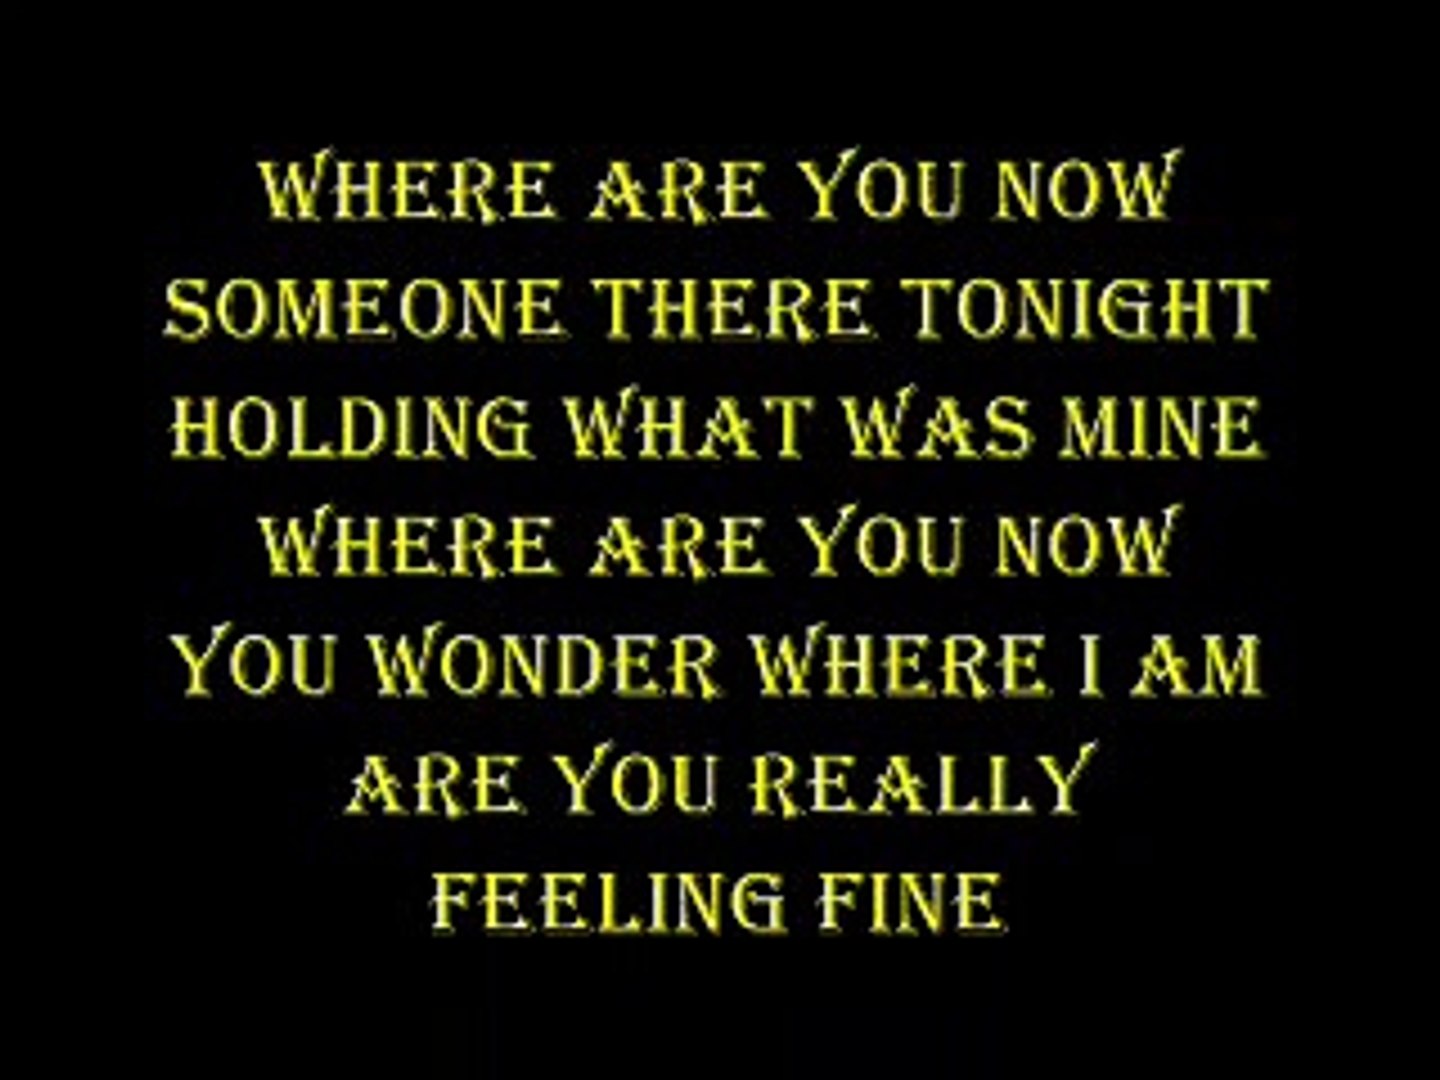 Where Are You Now - Jimmy Harnen (Lyrics Video) 